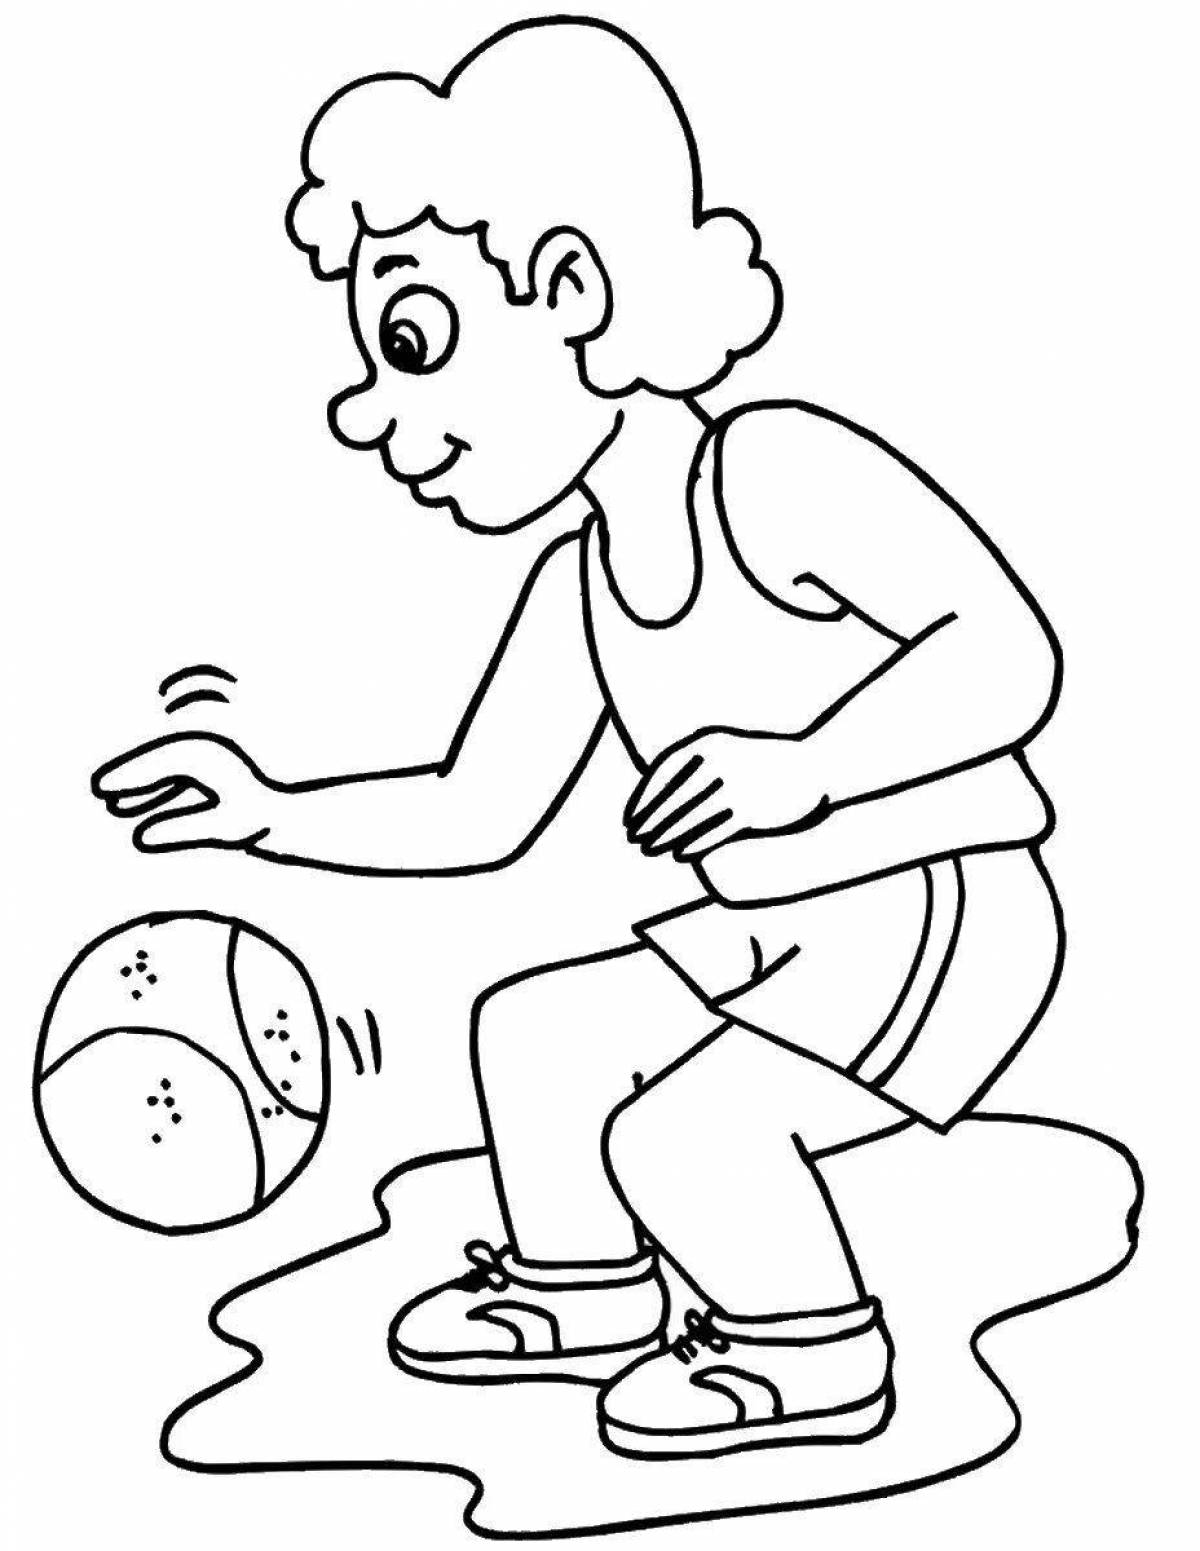 Bright health education coloring page